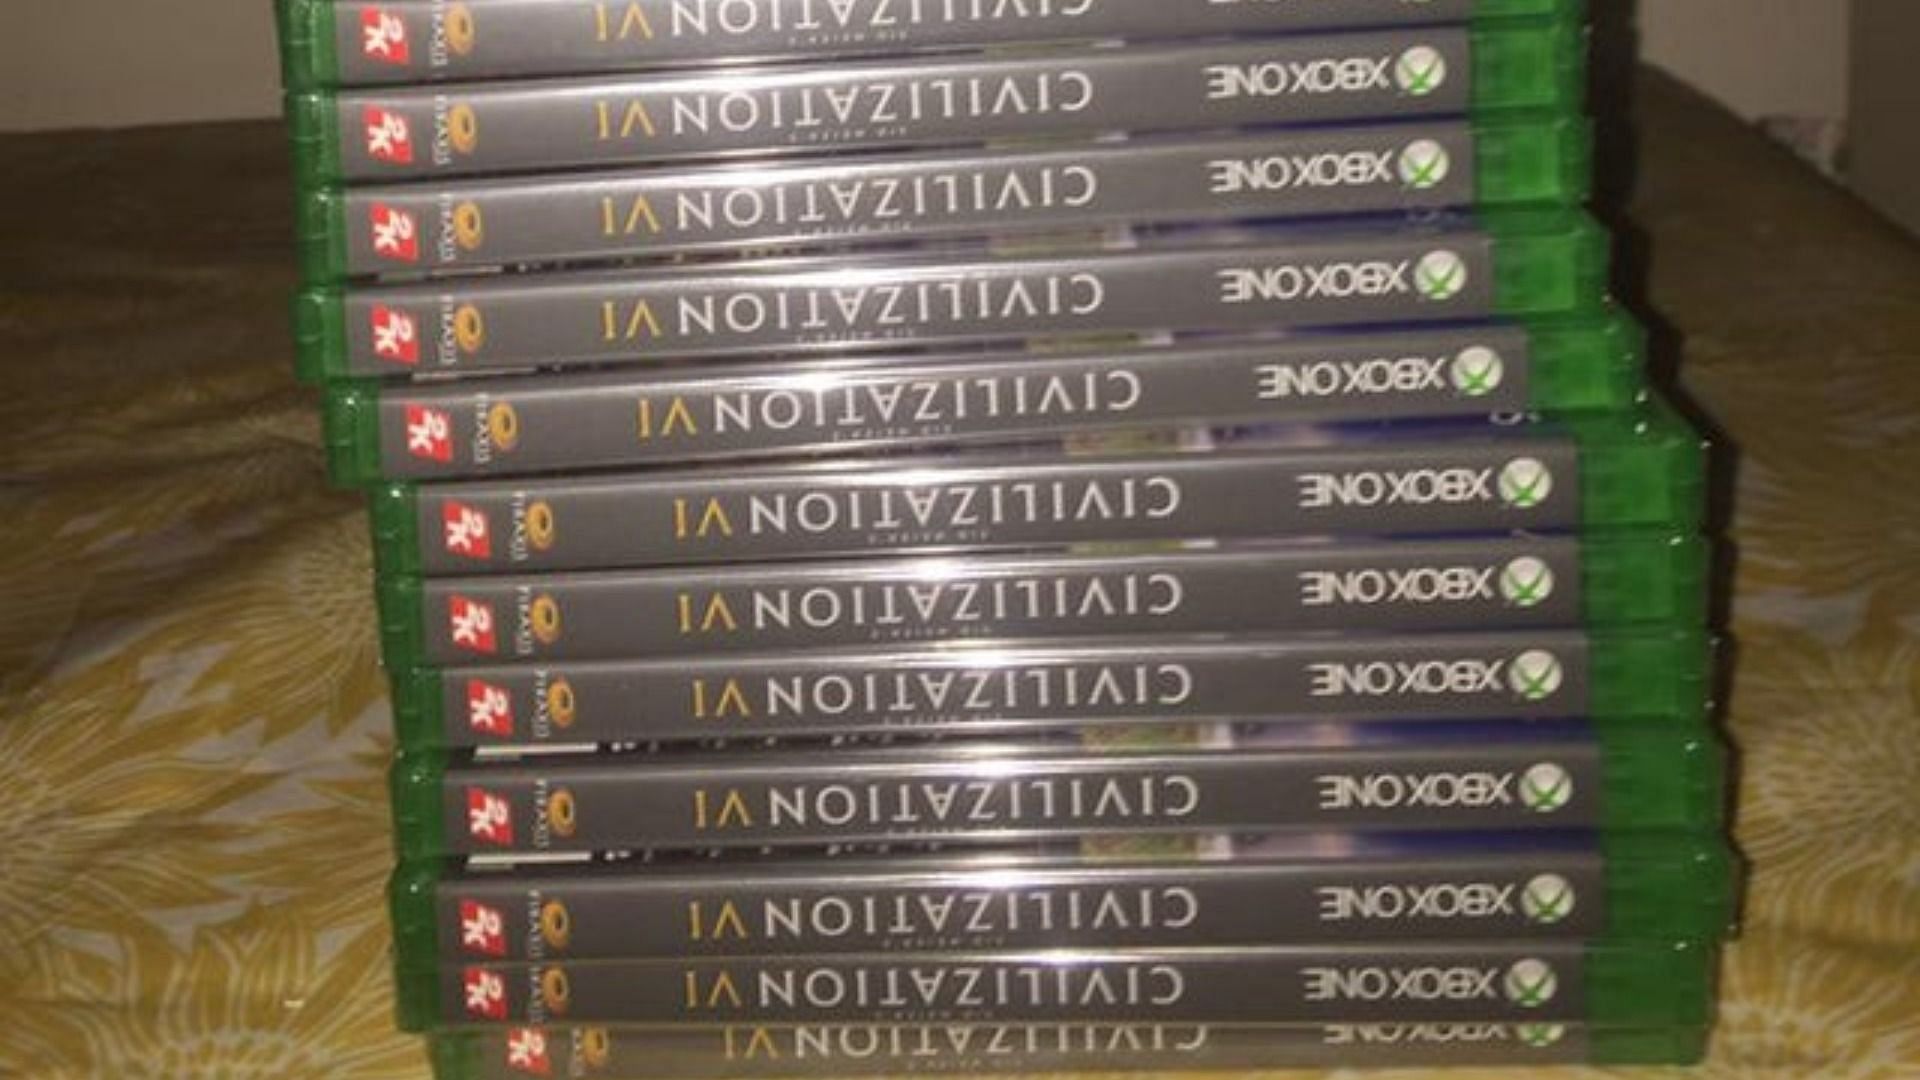 Xbox player receives 23 discs of the same game from Amazon (Image via Reddit)